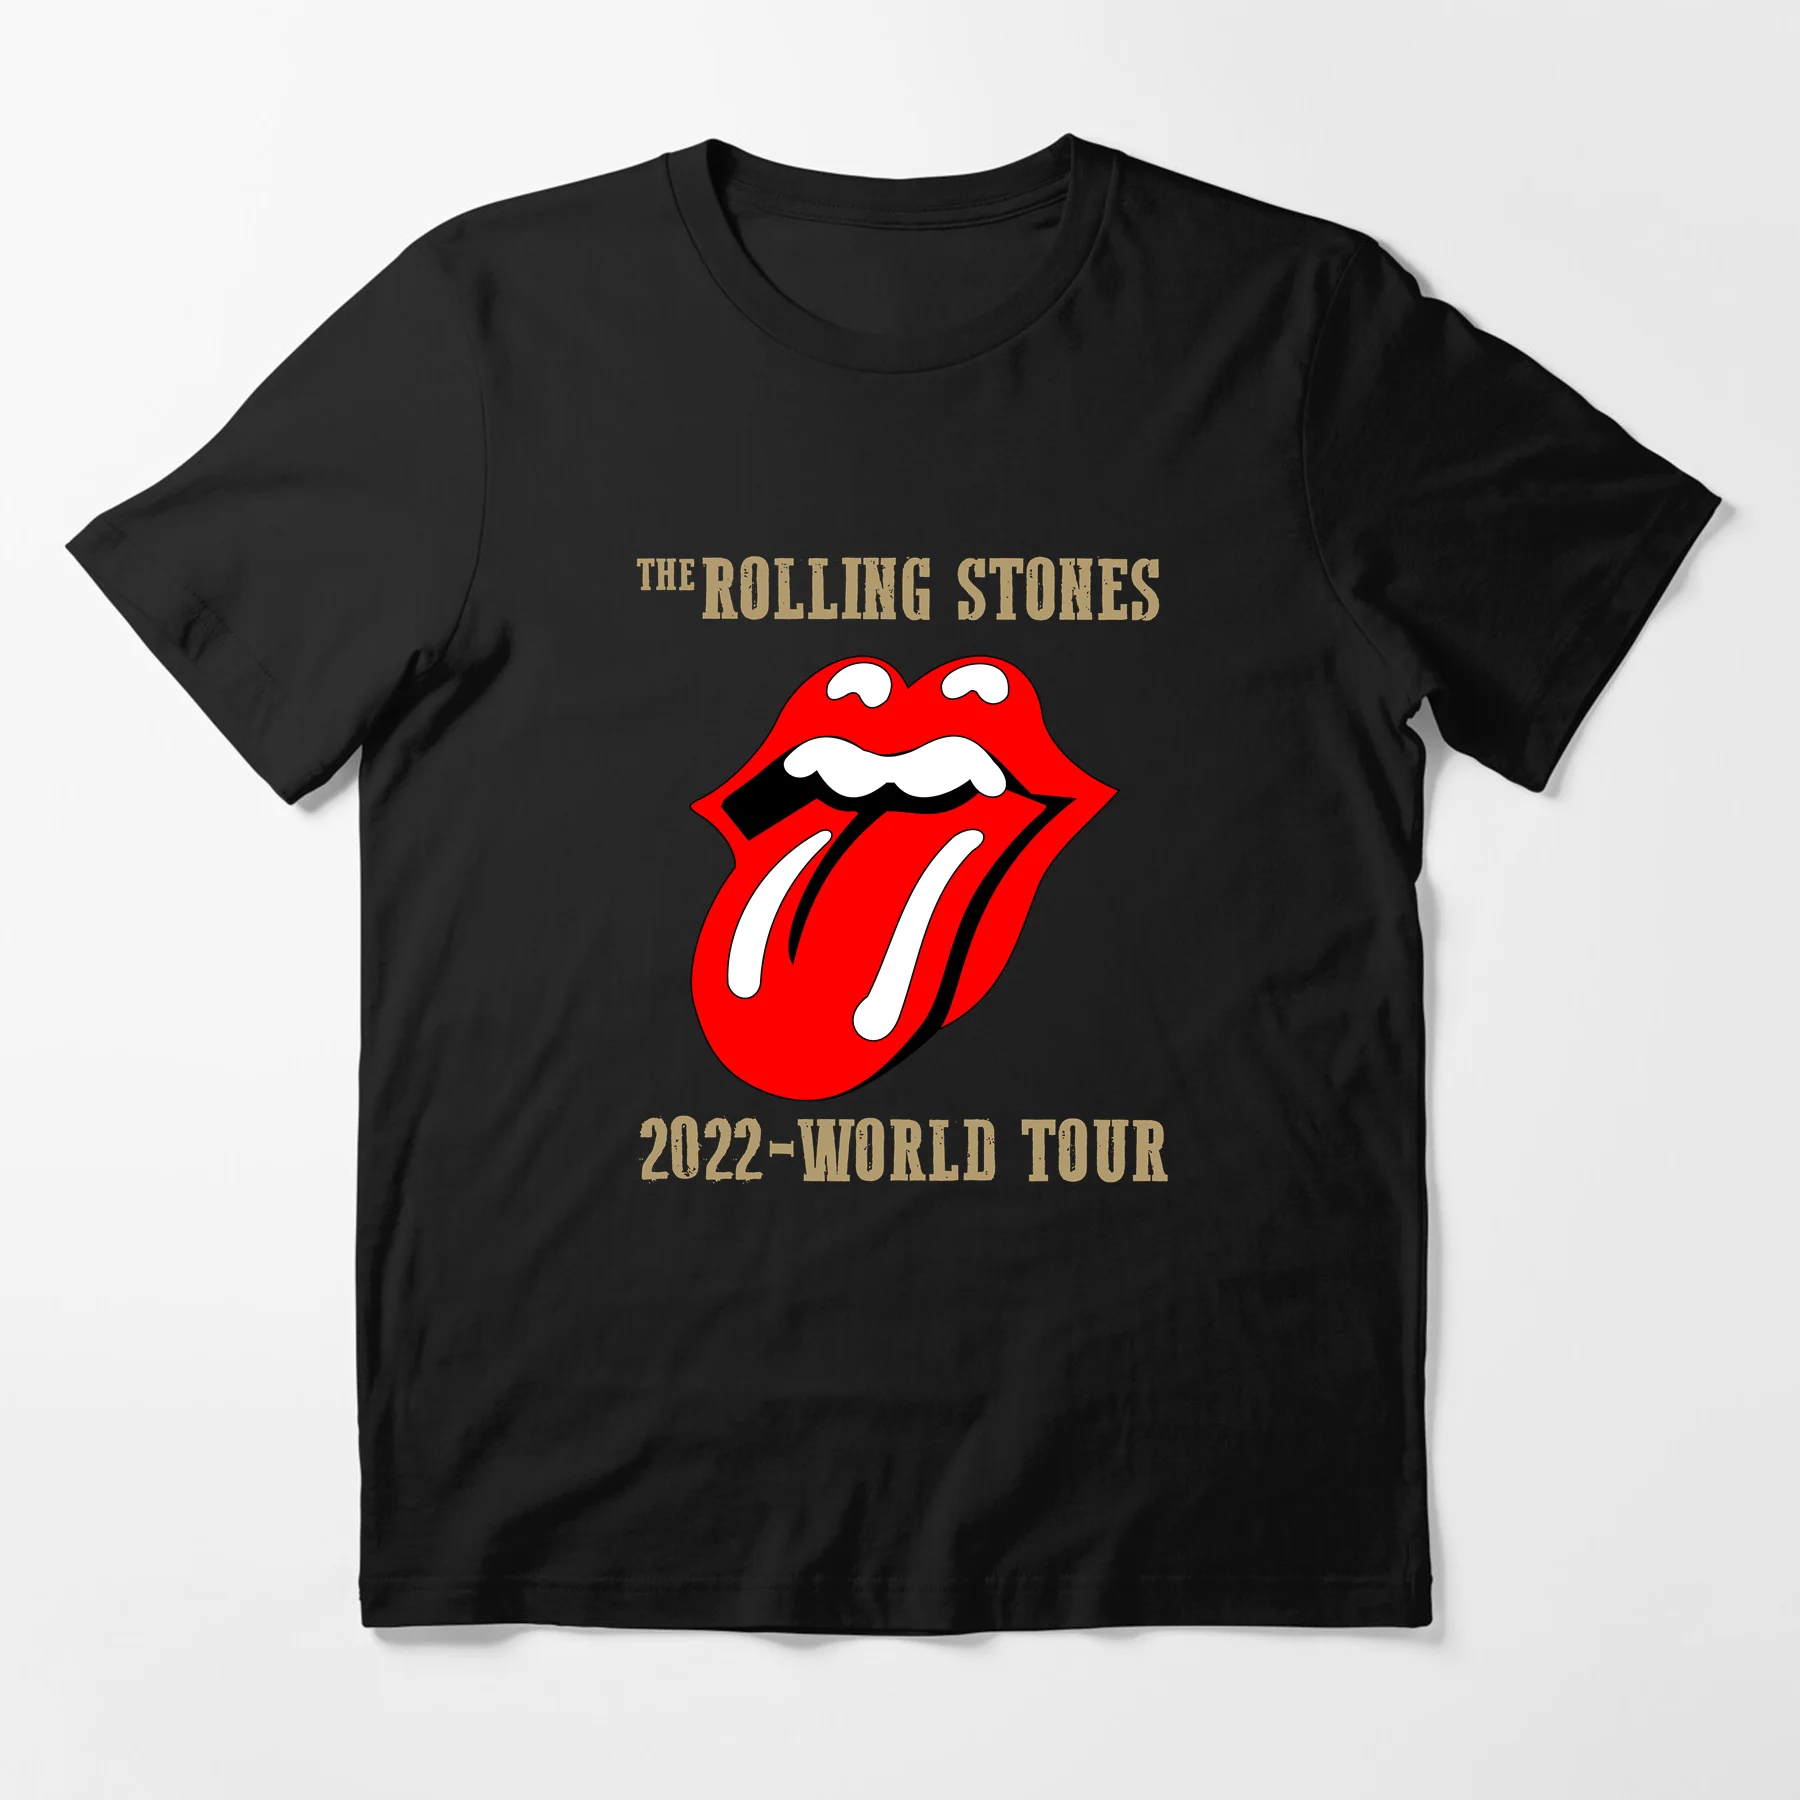 

Amazing Tees Male T Shirt Casual Oversized The Rolling Stones 2022 World Tour T-shirt Men T-shirts Graphic Short Sleeve S-3XL